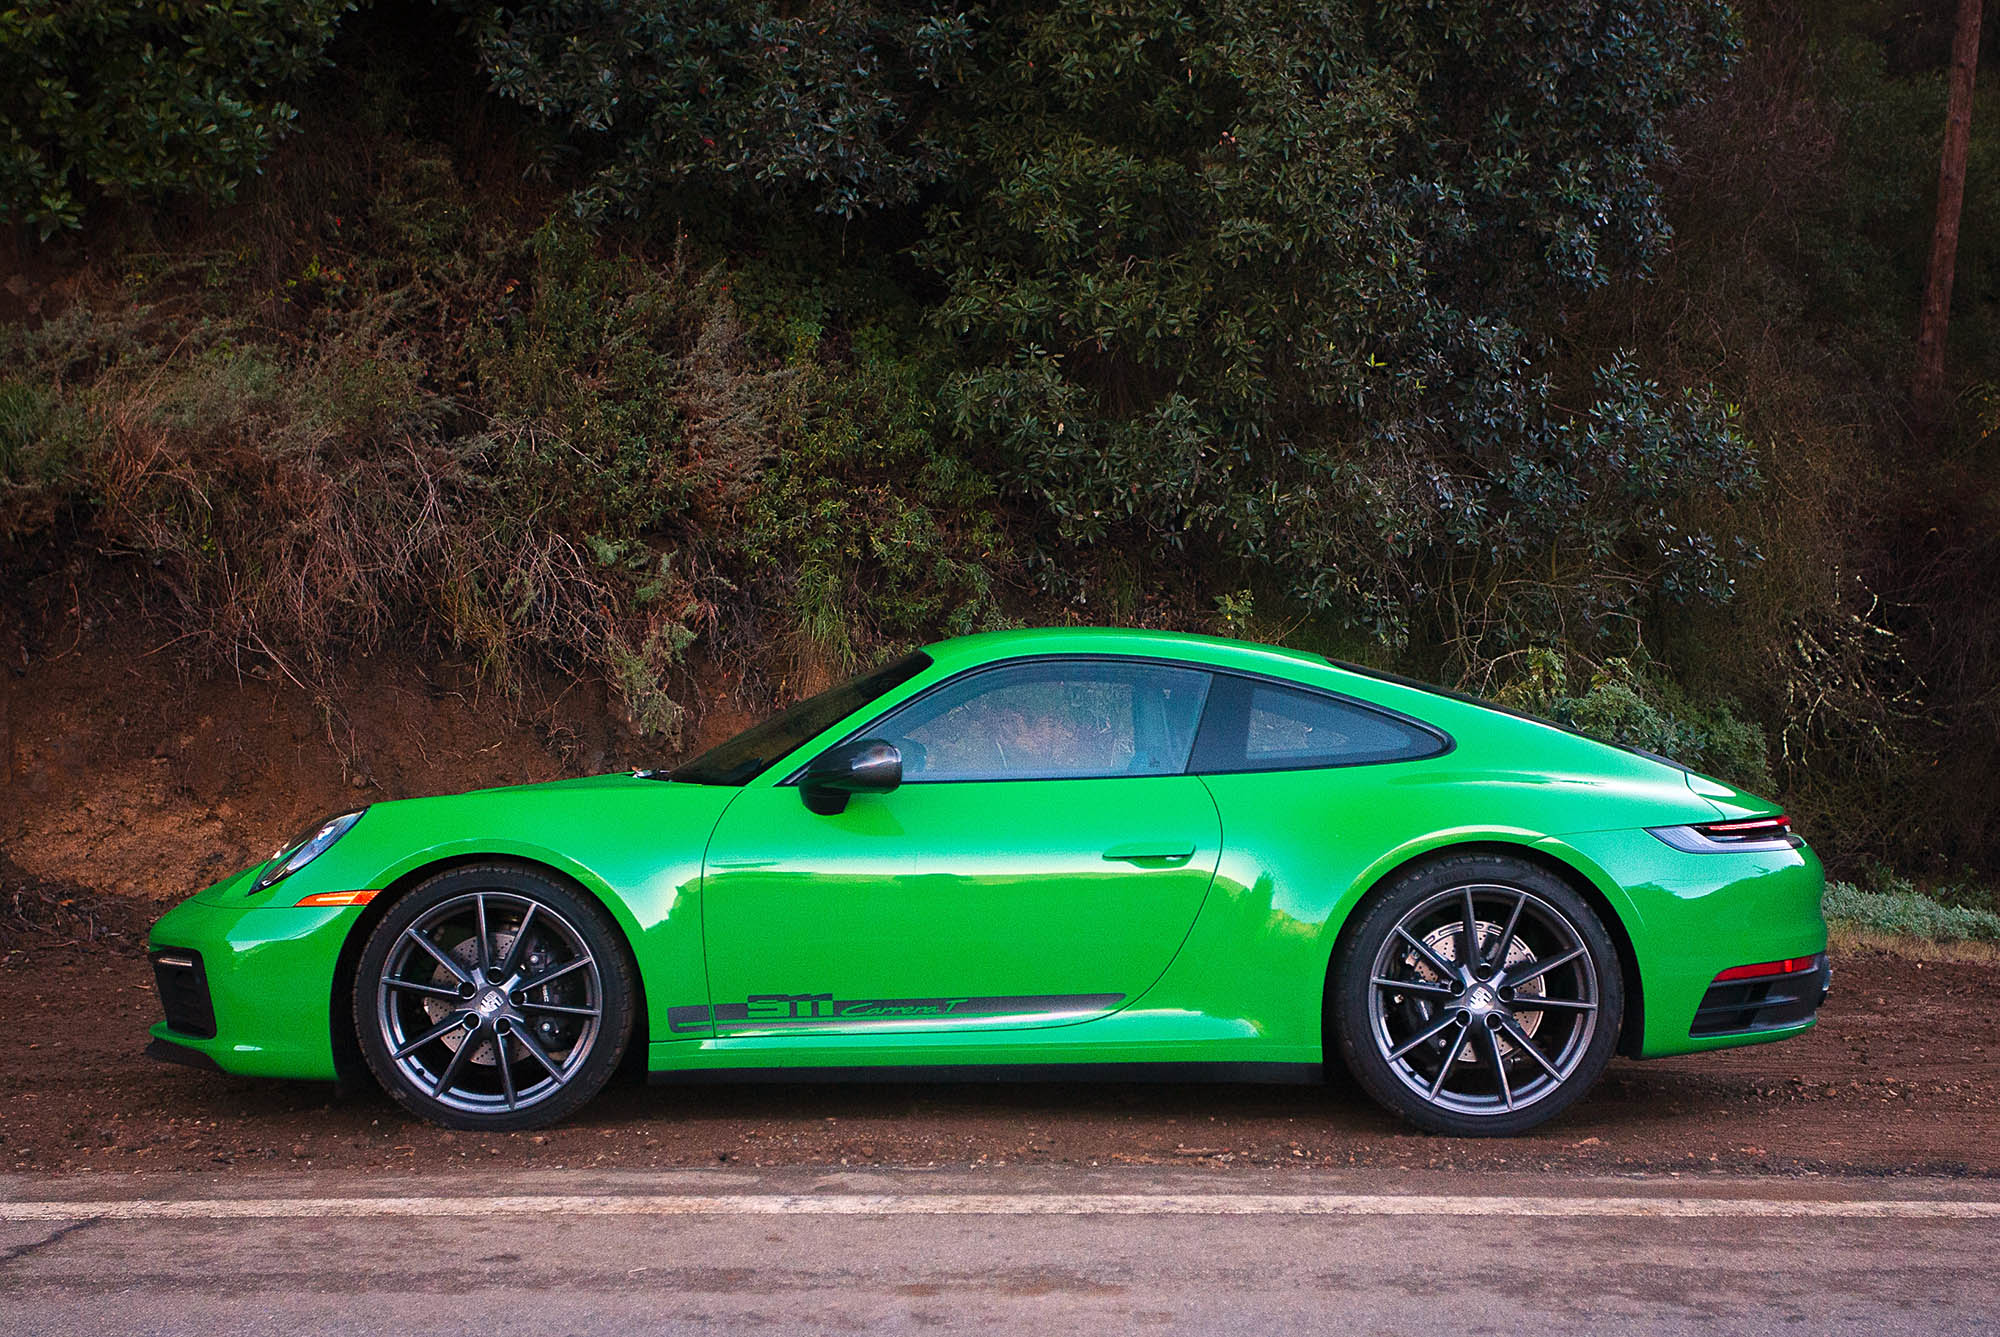  2023 Porsche 911 Carrera T in Python Green parked beside a road, side view.